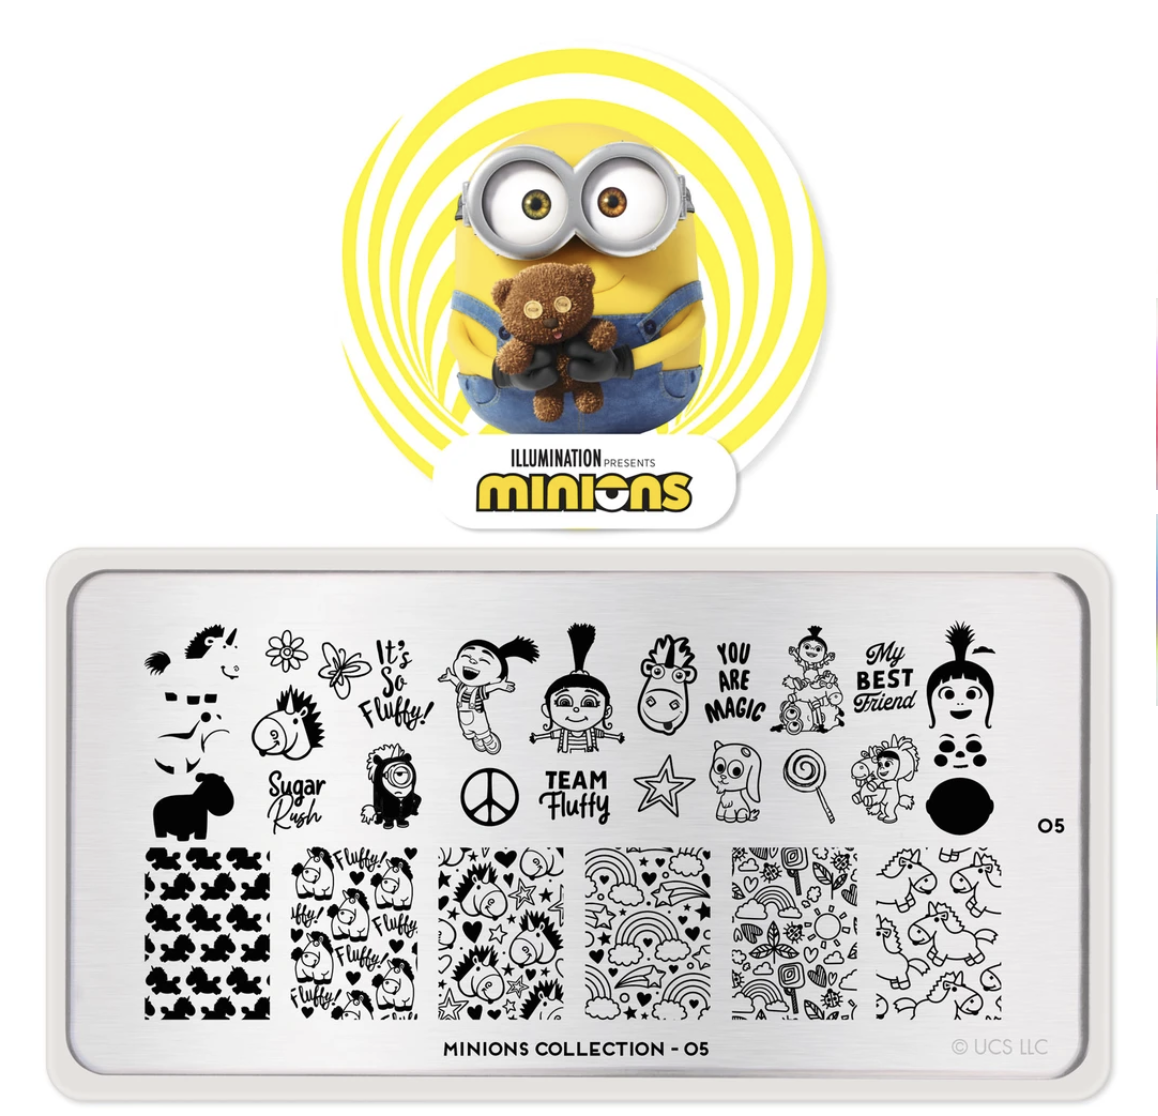 Minions 05 ✦ Special Edition